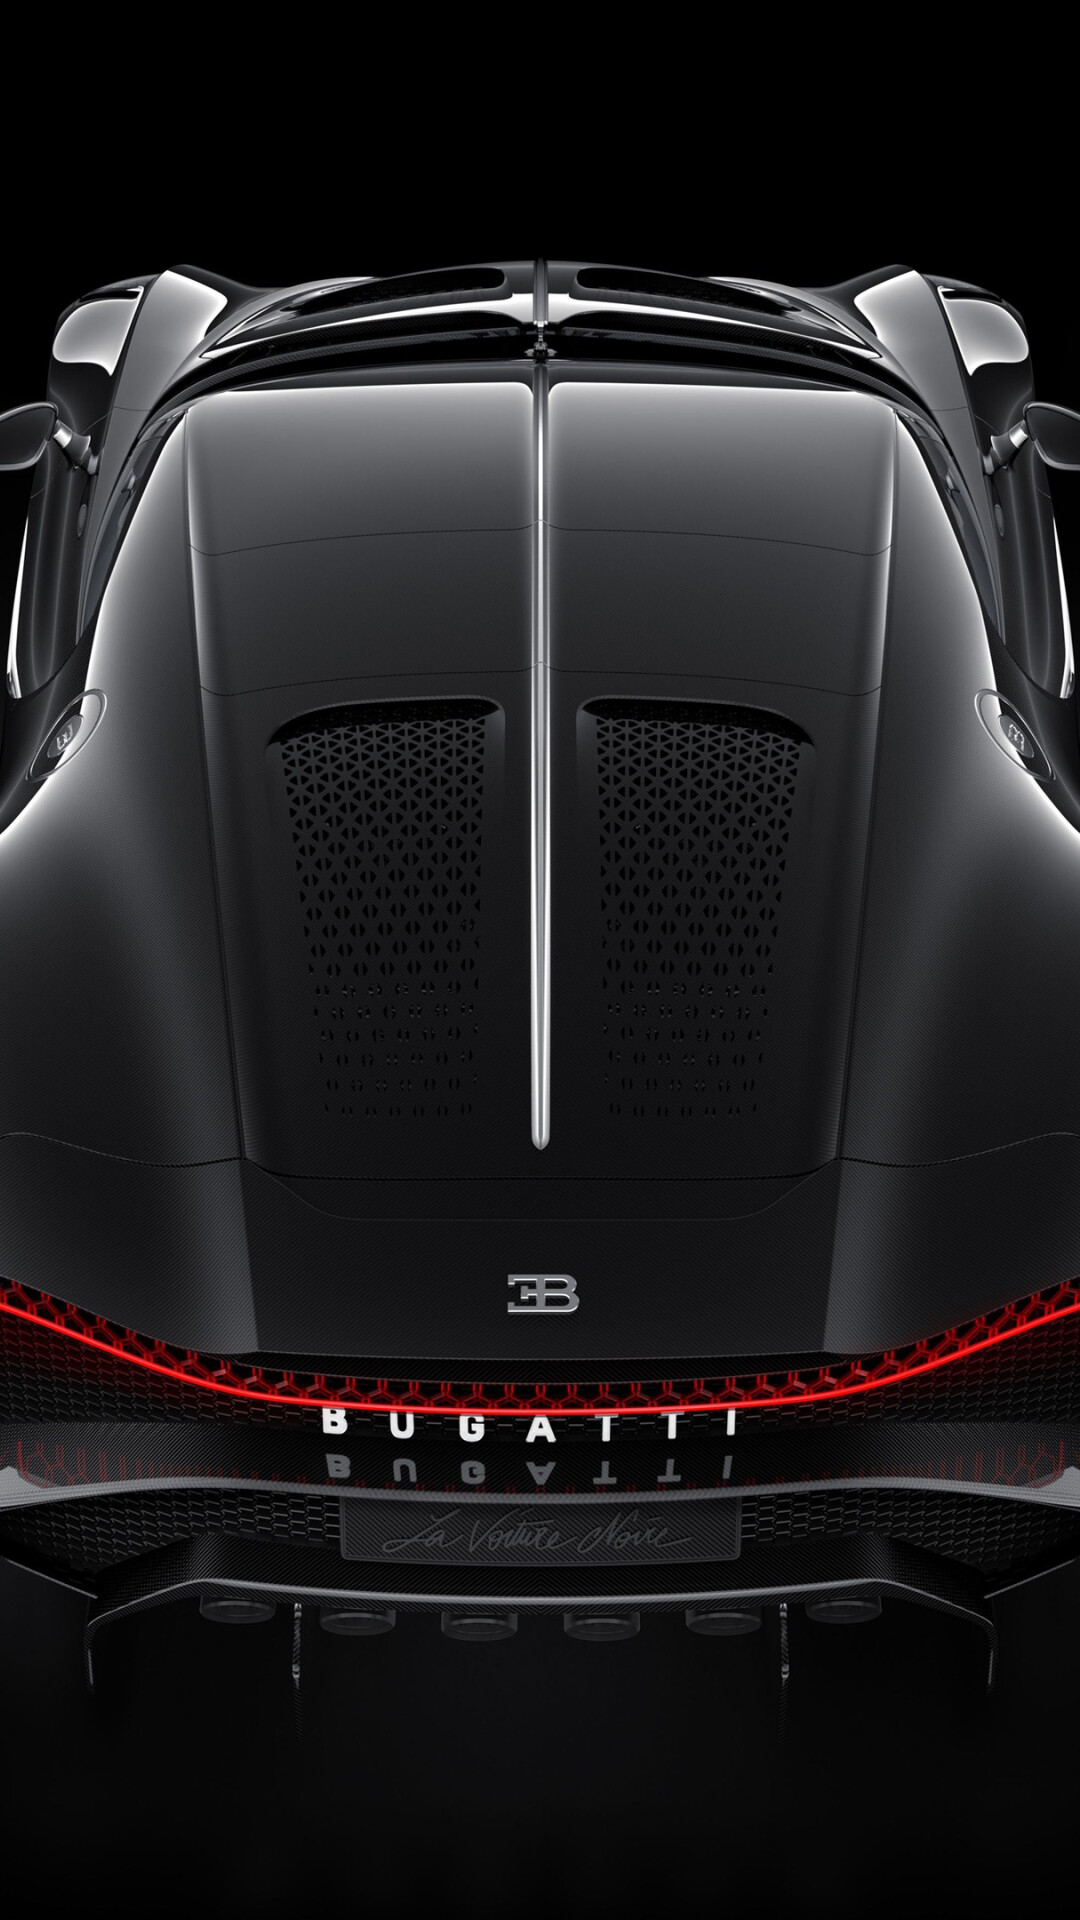 Bugatti La Voiture Noire: The Most Expensive New Car In The World, A French Supercar. 1080x1920 Full HD Wallpaper.